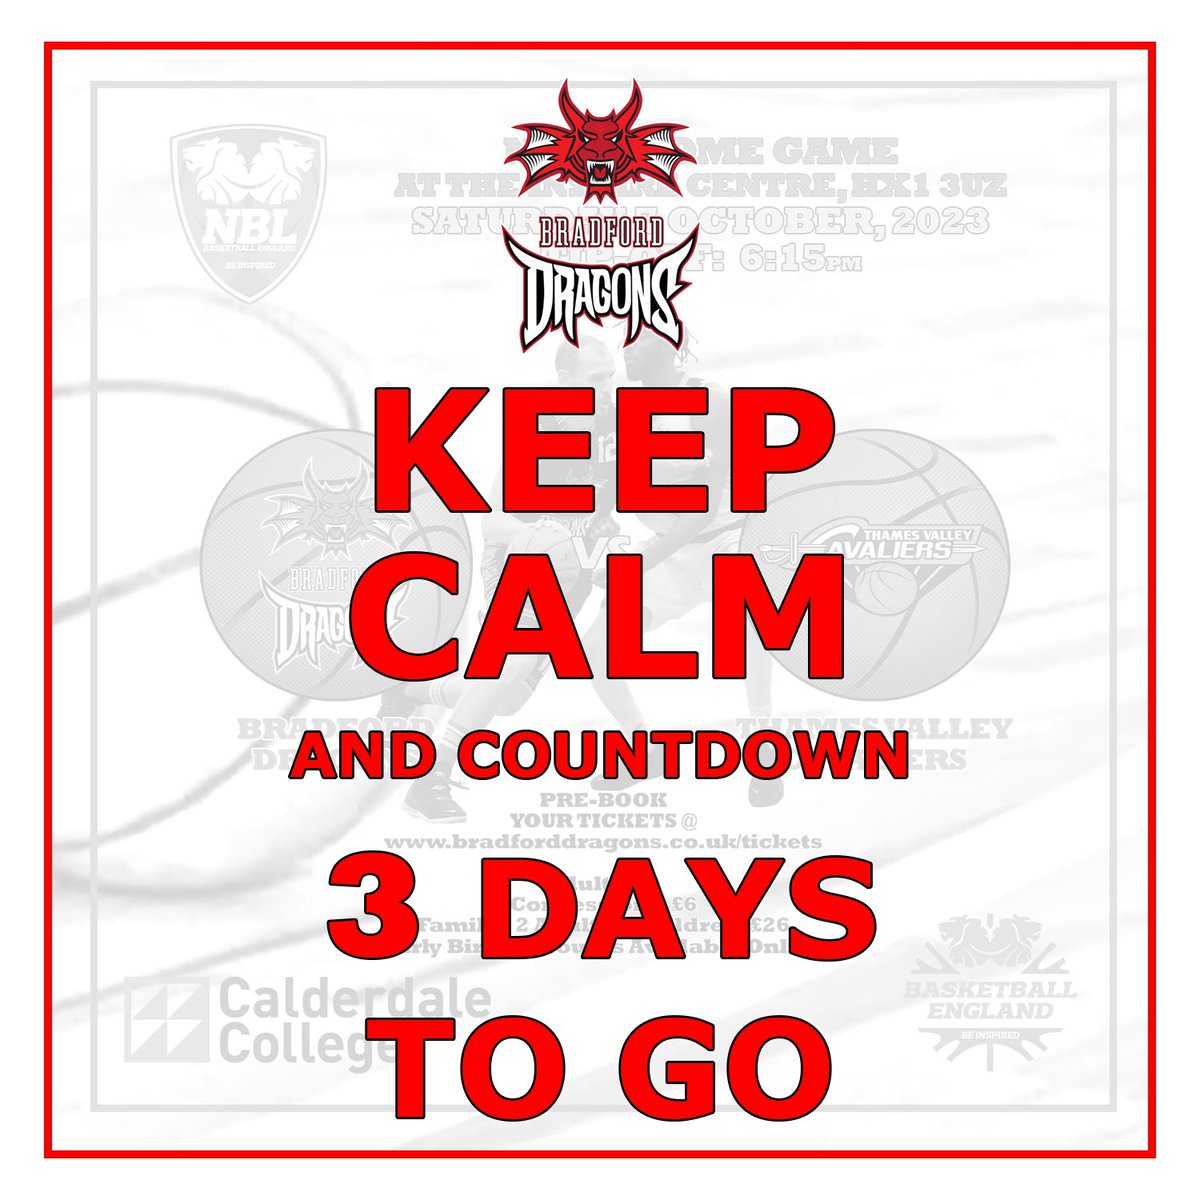 Just 3 days to go before the start of the 2023-24 National Basketball League Division One season. Prebook your tickets via bradforddragons.co.uk/tickets before midnight on Friday to receive your 20% early bird discount. #OneClubOneFamily #BradfordDragons #Basketball #nbl2324